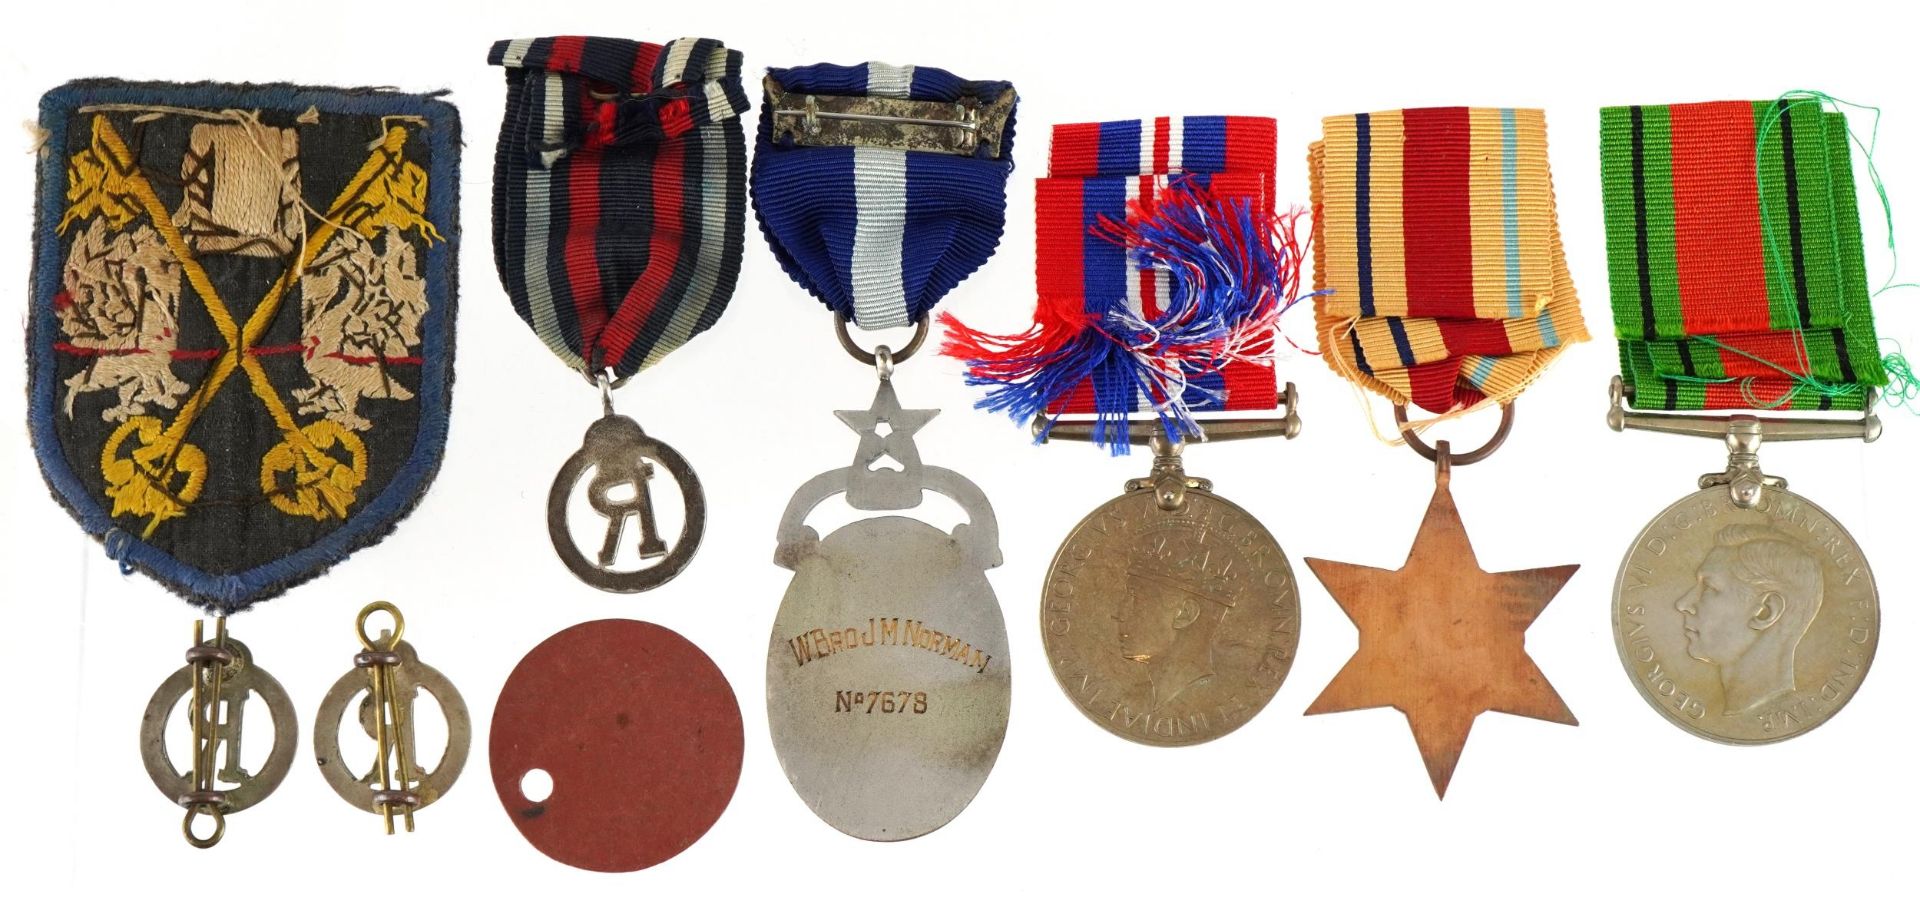 British military World War II medal group including masonic medal awarded to W Bro J M Norman, three - Image 3 of 3